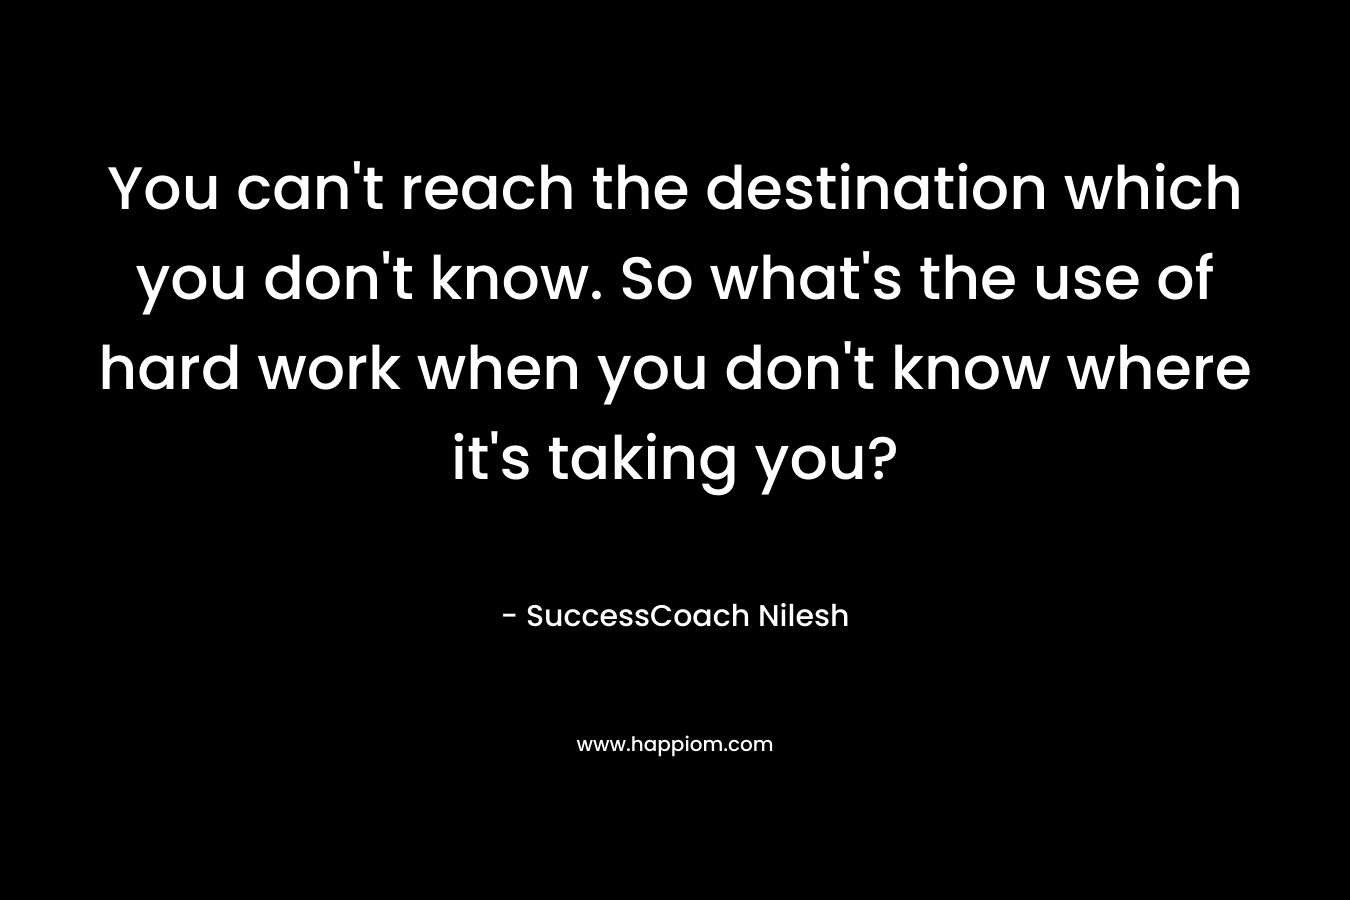 You can't reach the destination which you don't know. So what's the use of hard work when you don't know where it's taking you?